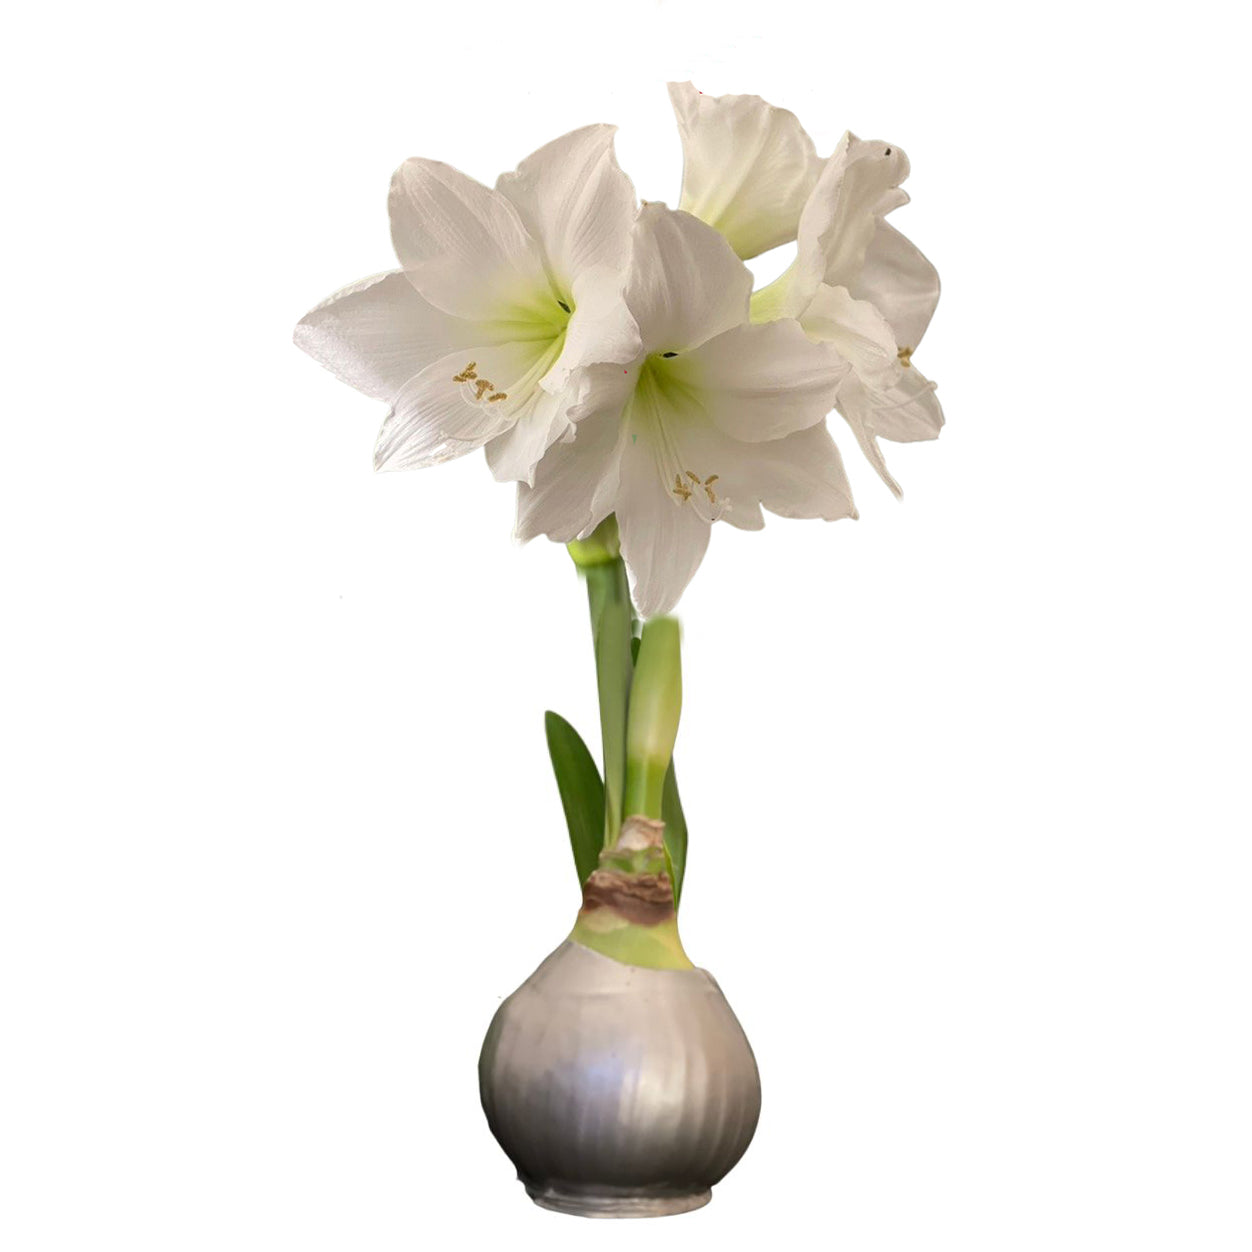 New Year's Bundle - Gold & Silver Waxed Amaryllis Bulb Duo - Sold Out